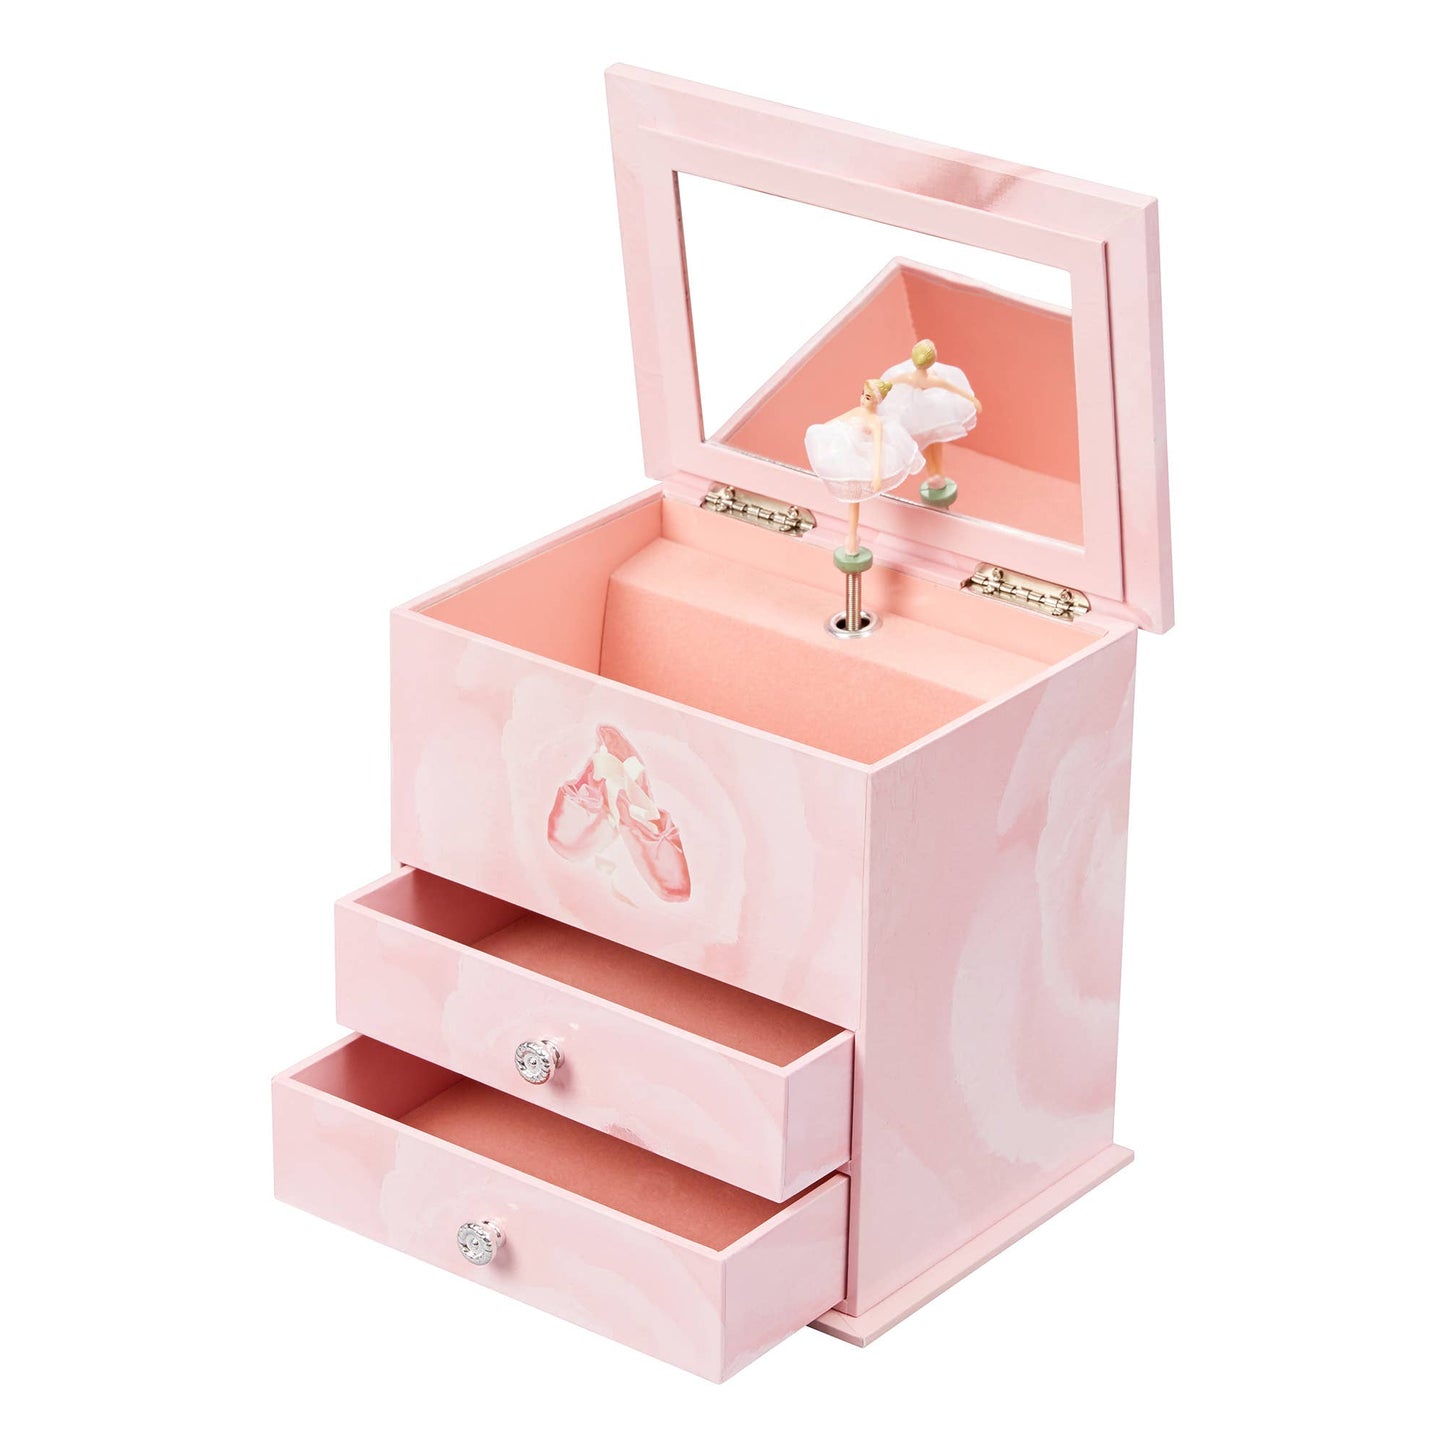 Mele and Co Casey Girl's Musical Ballerina Jewelry Box: Girls Musical Ballerina Jewelry Box / Waltz of the Flowers / Large